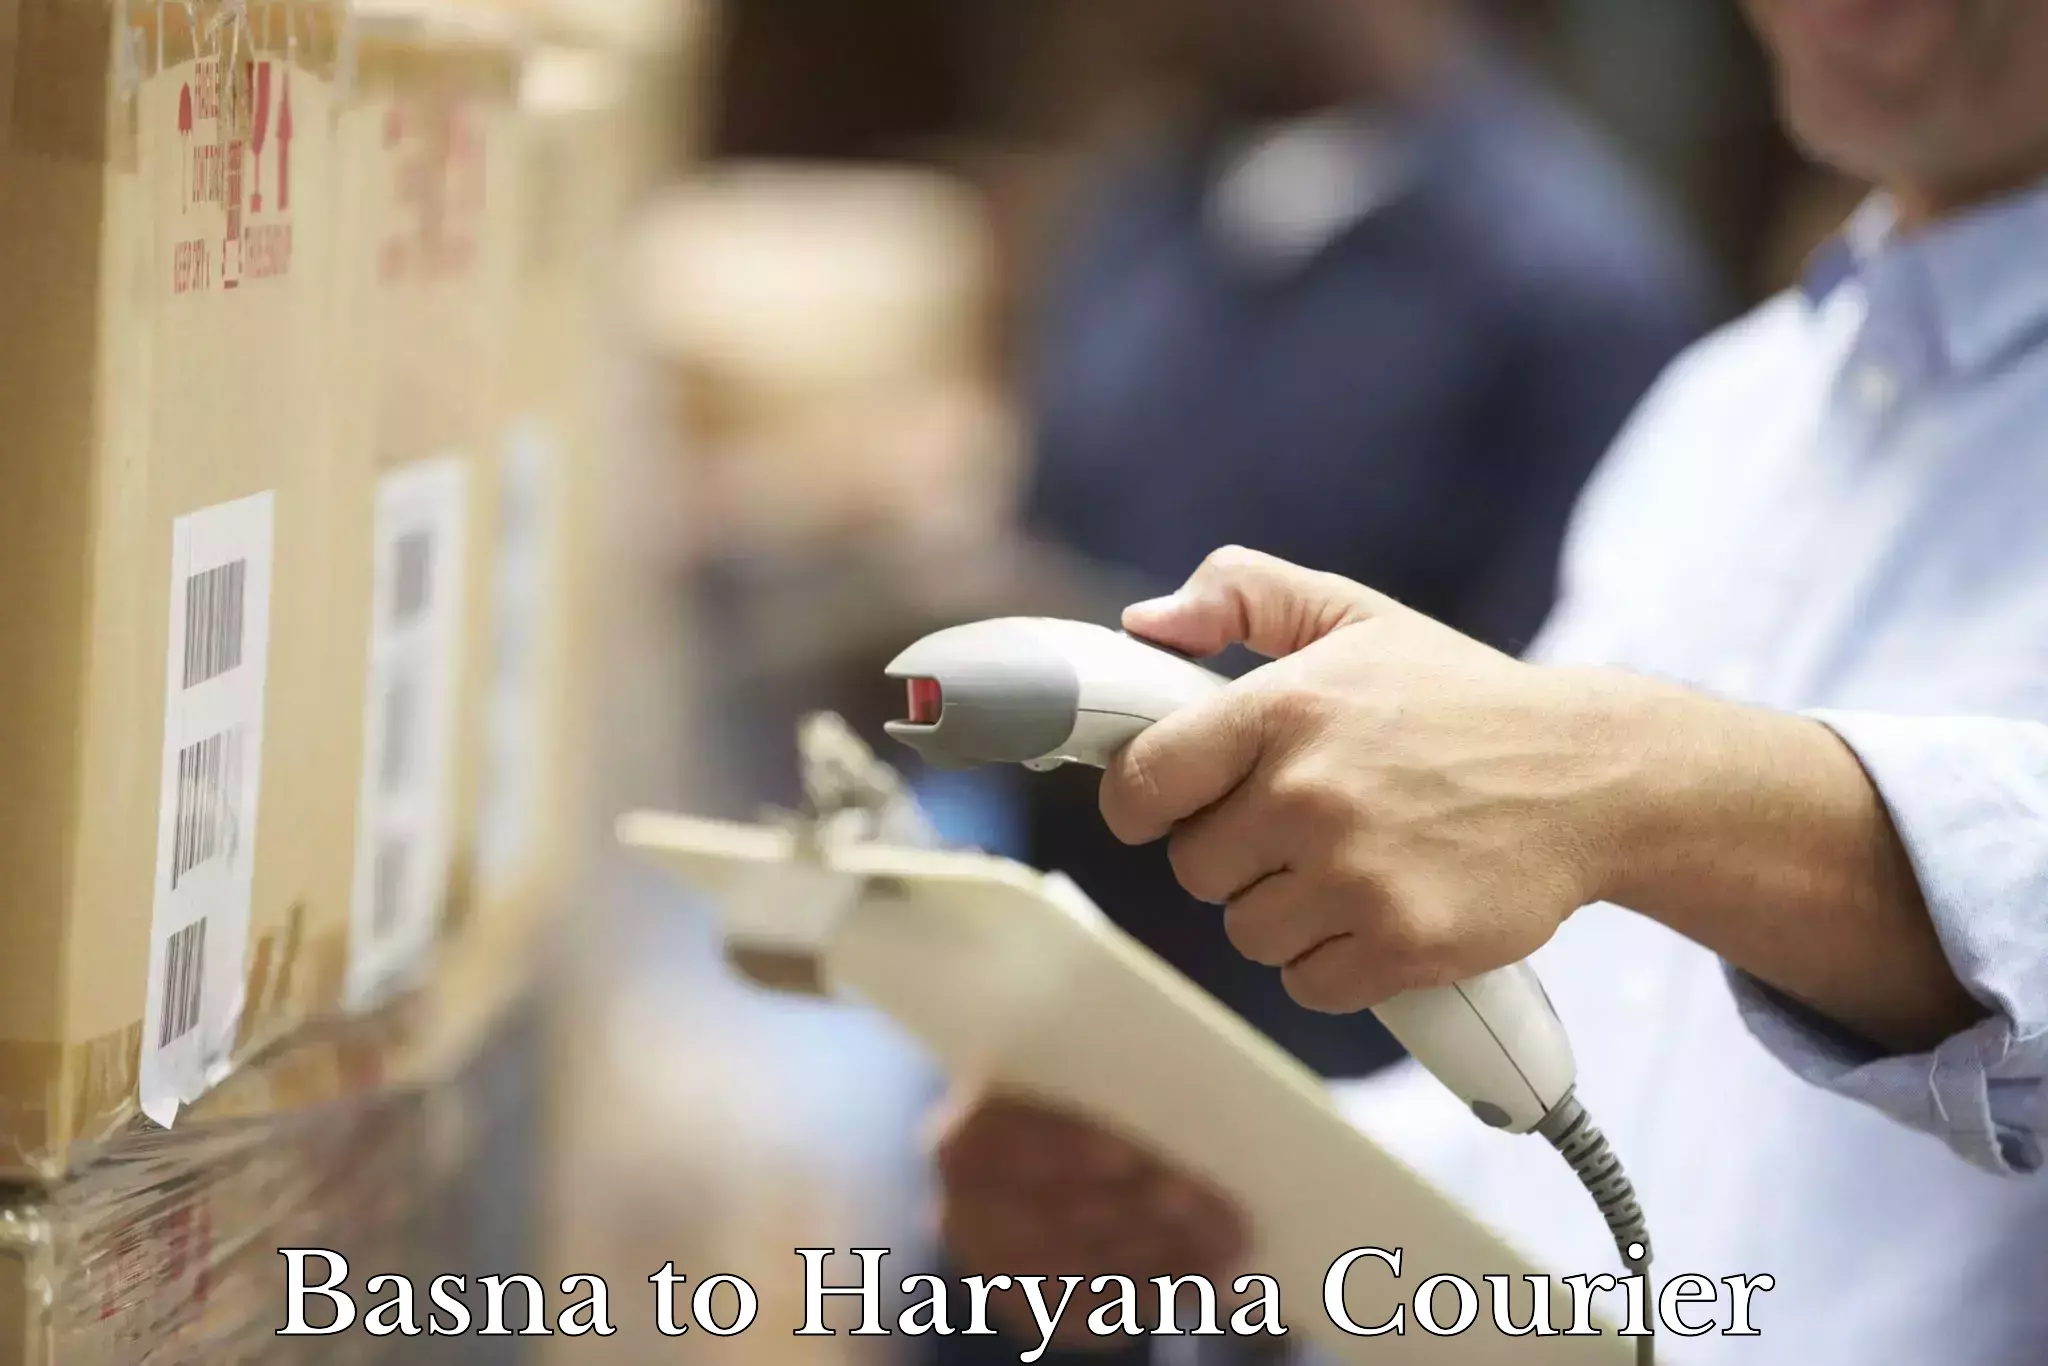 Efficient order fulfillment in Basna to Gurgaon